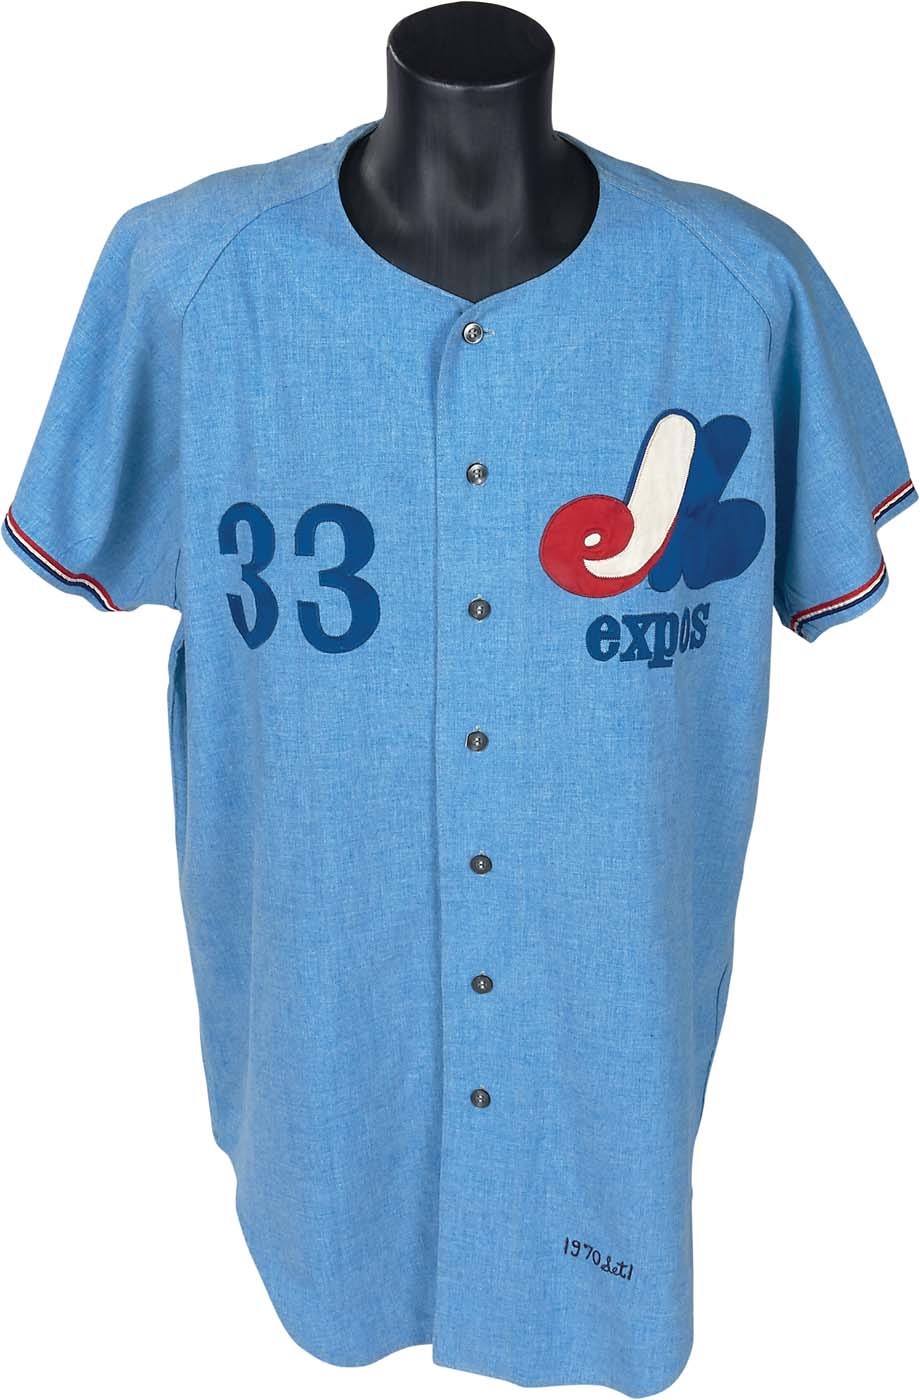 1970 Dick Williams Montreal Expos Jersey - Only Known Expos HOF Flannel